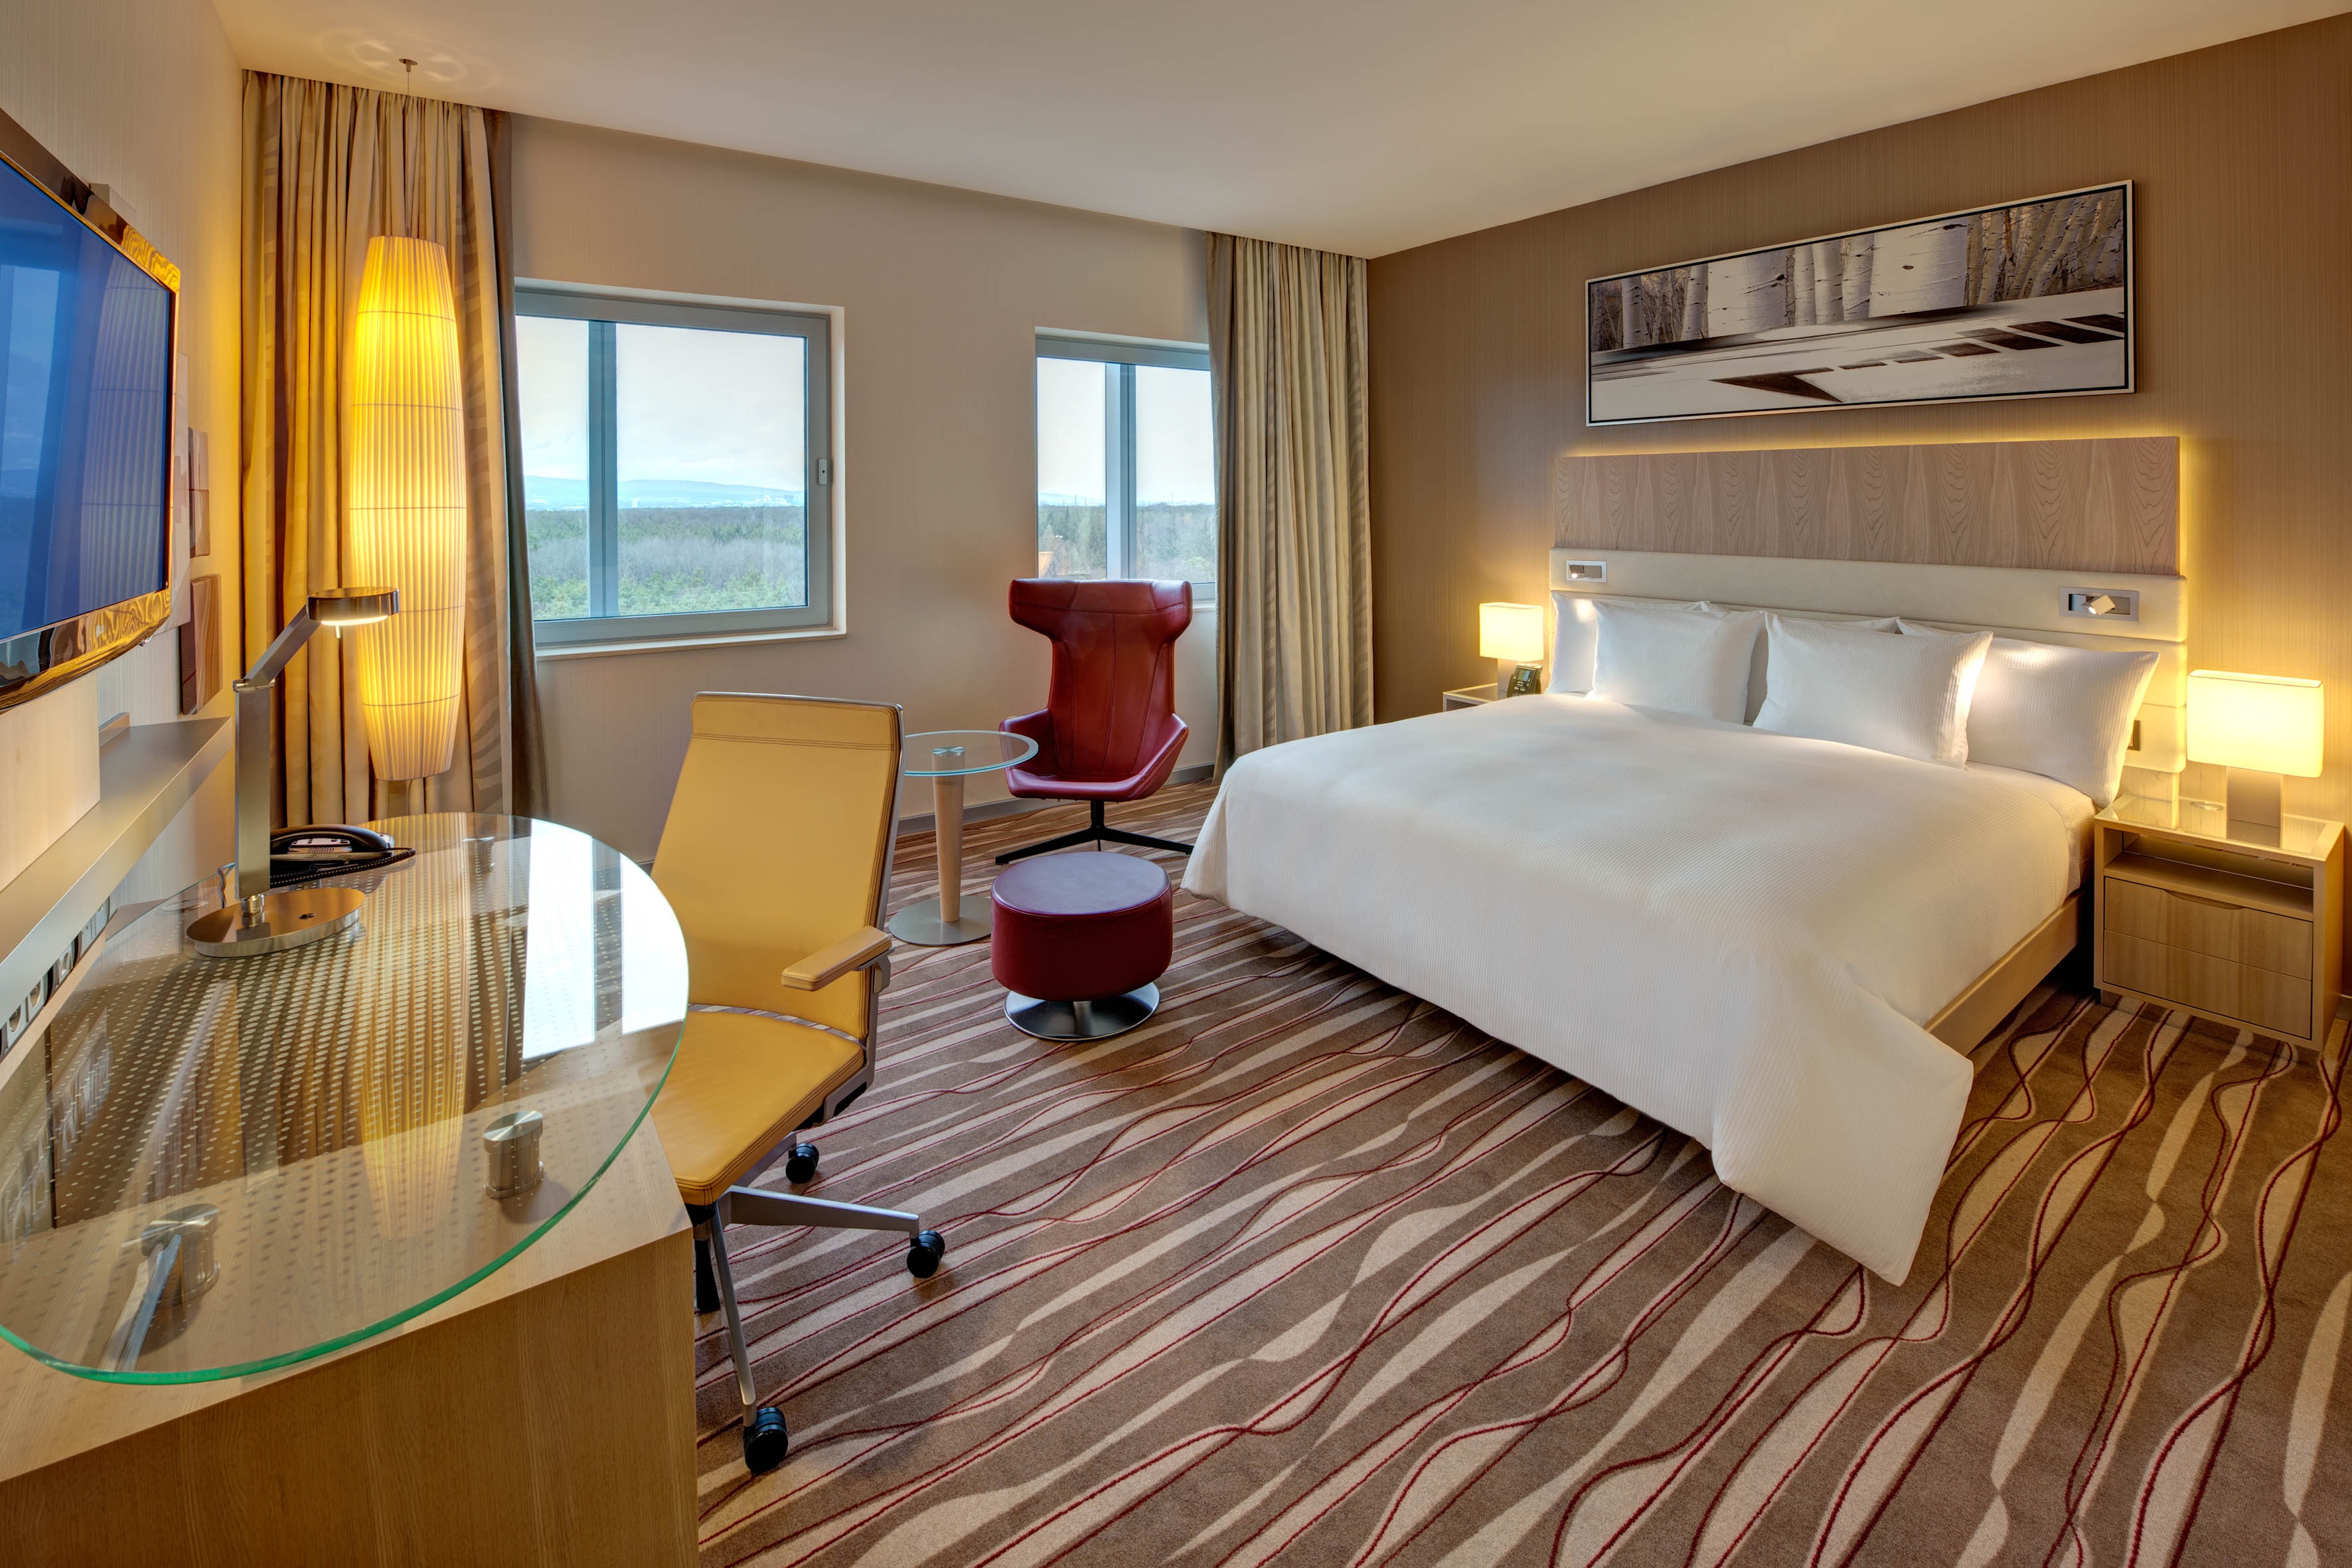 King-Sized Bed and Desk in Hilton Executive Room